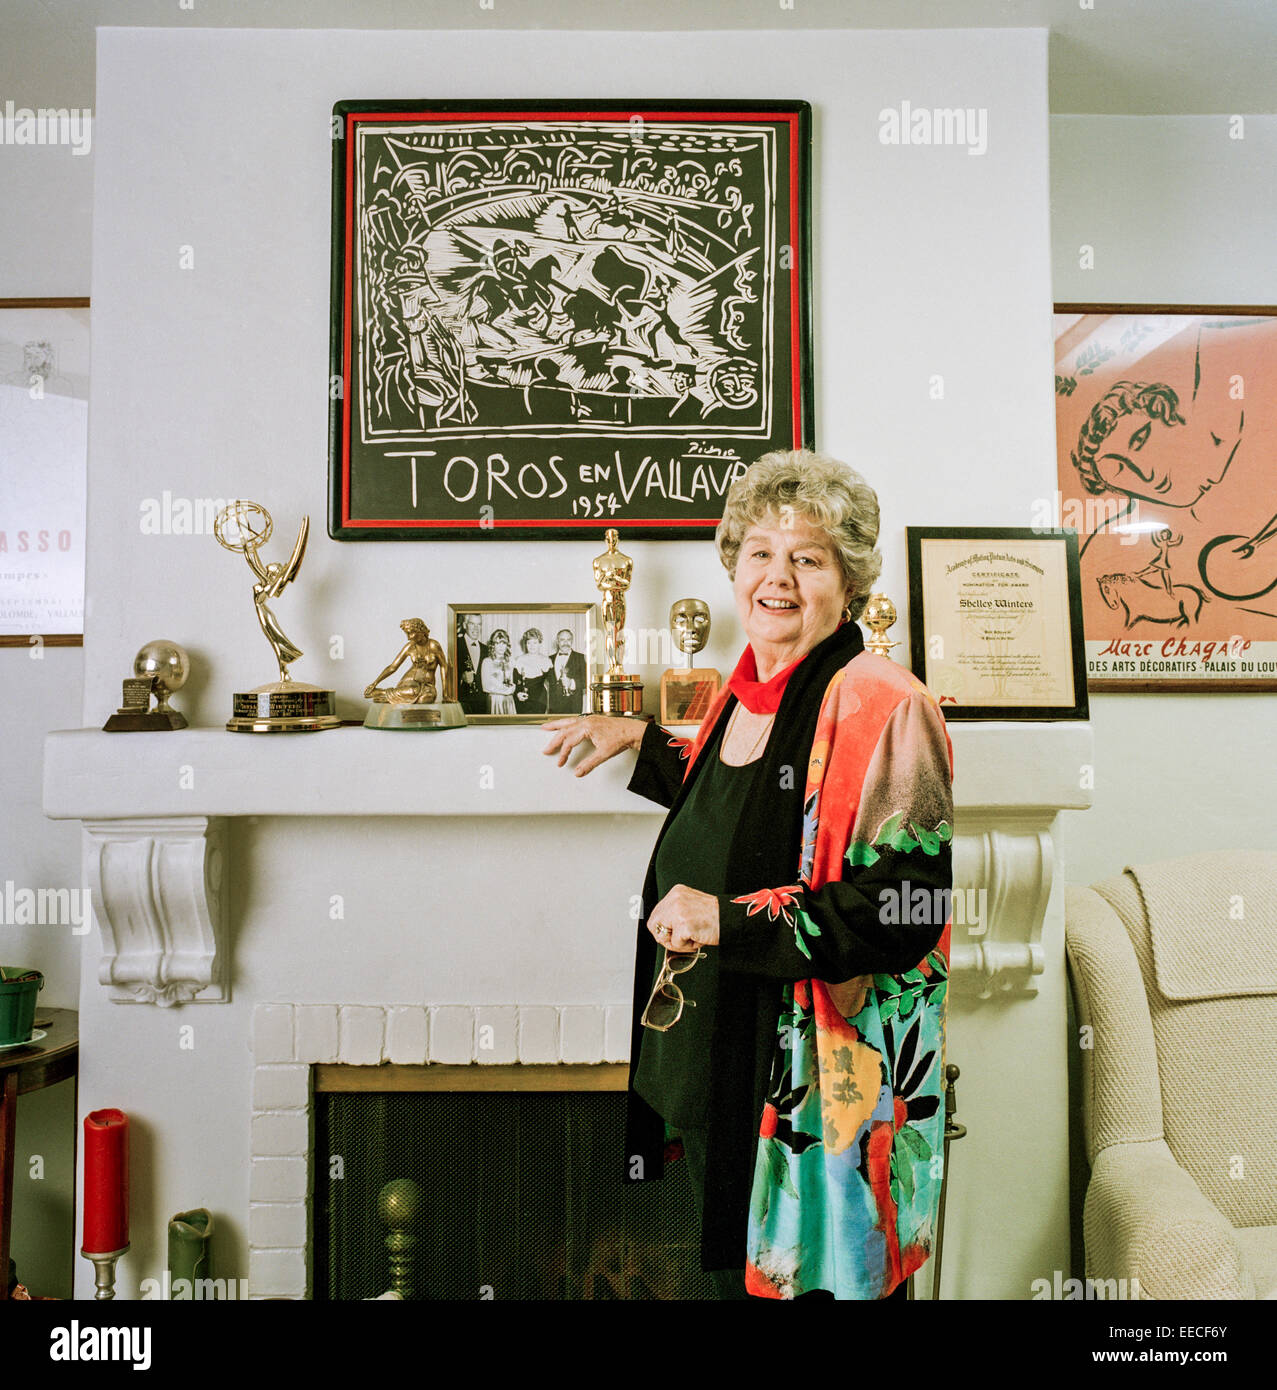 LOS ANGELES, CA – MARCH 1: Oscar-winning actress Shelley Winters at her home in Los Angeles, California on March 1, 1996. Stock Photo